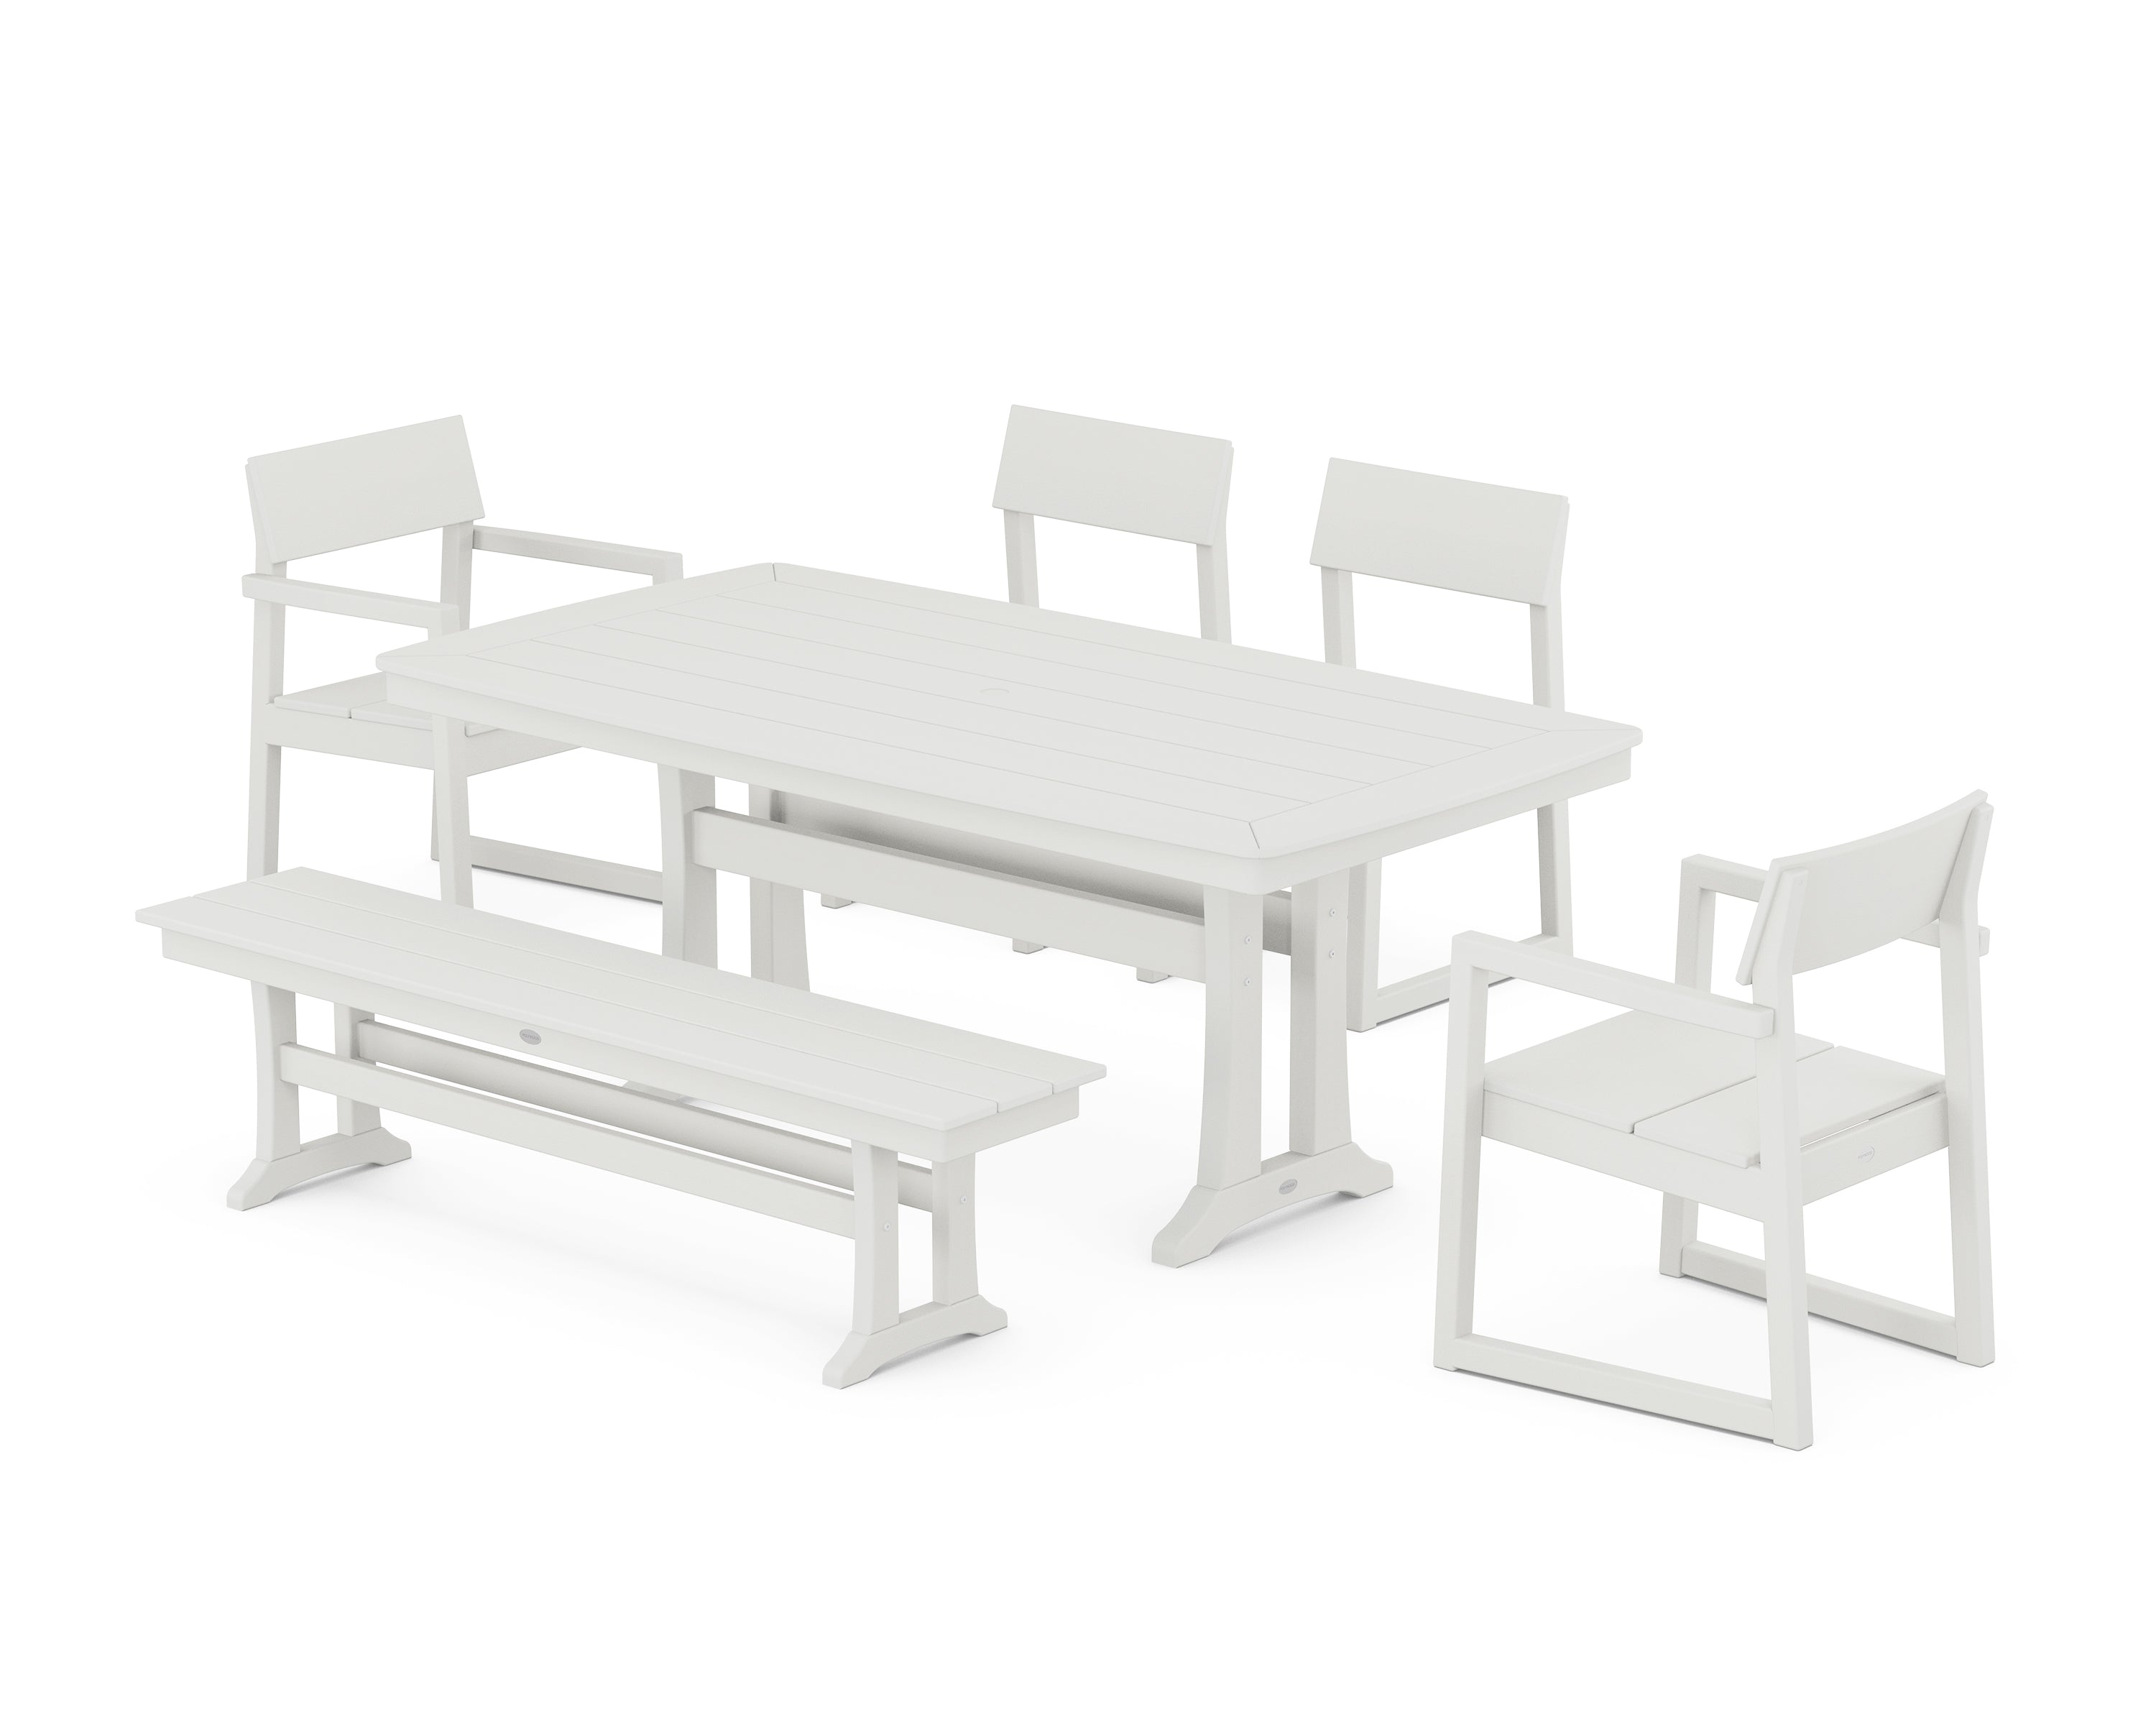 POLYWOOD® EDGE 6-Piece Dining Set with Trestle Legs in Vintage White